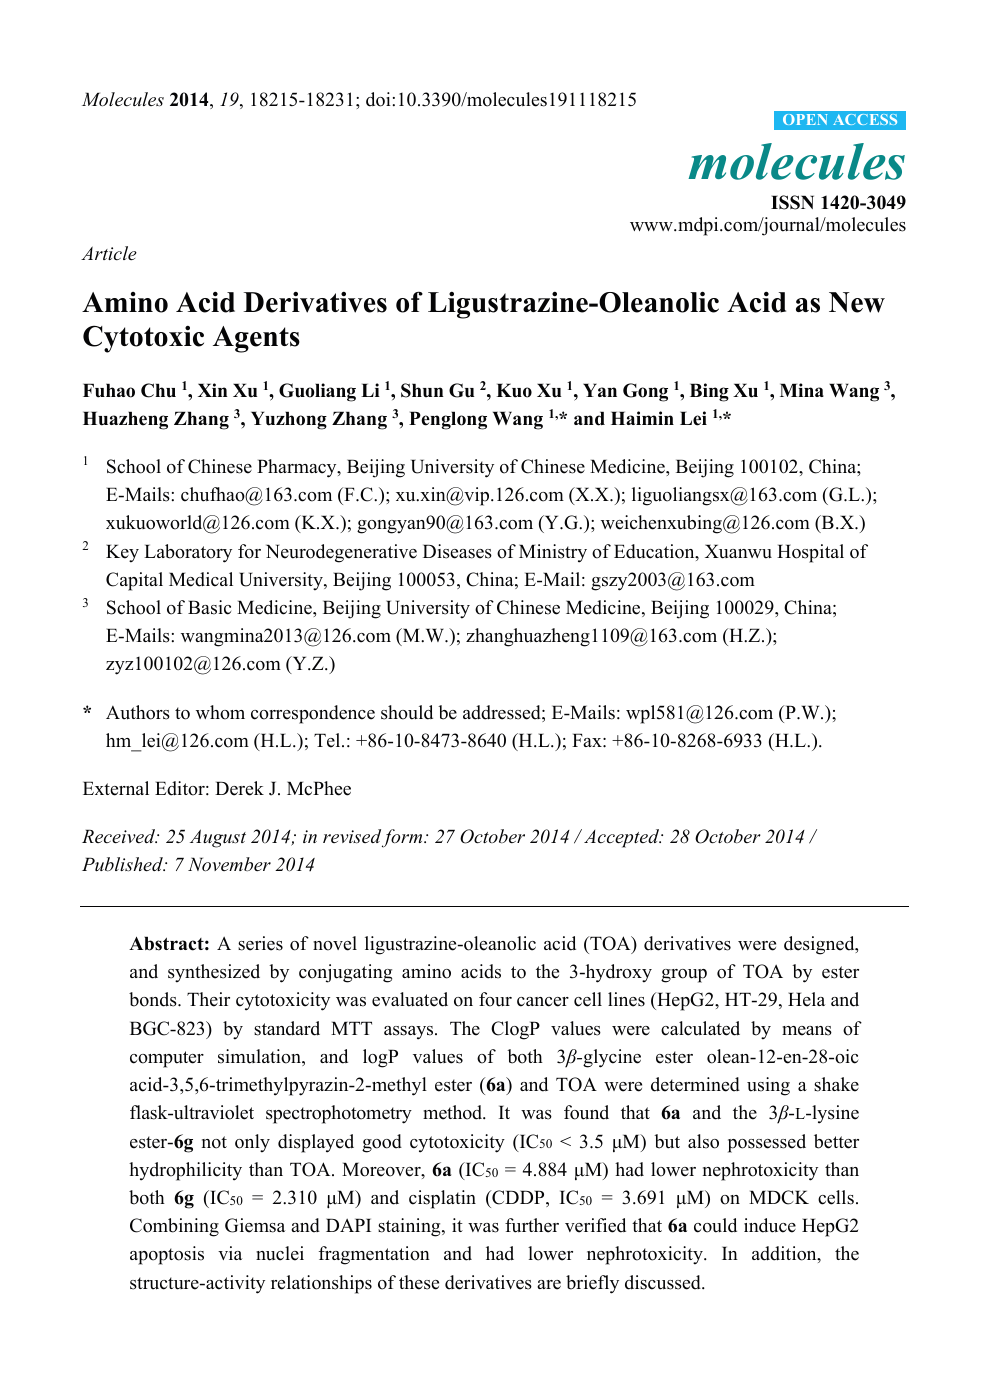 Amino Acid Derivatives Of Ligustrazine Oleanolic Acid As New Cytotoxic Agents Topic Of Research Paper In Chemical Sciences Download Scholarly Article Pdf And Read For Free On Cyberleninka Open Science Hub